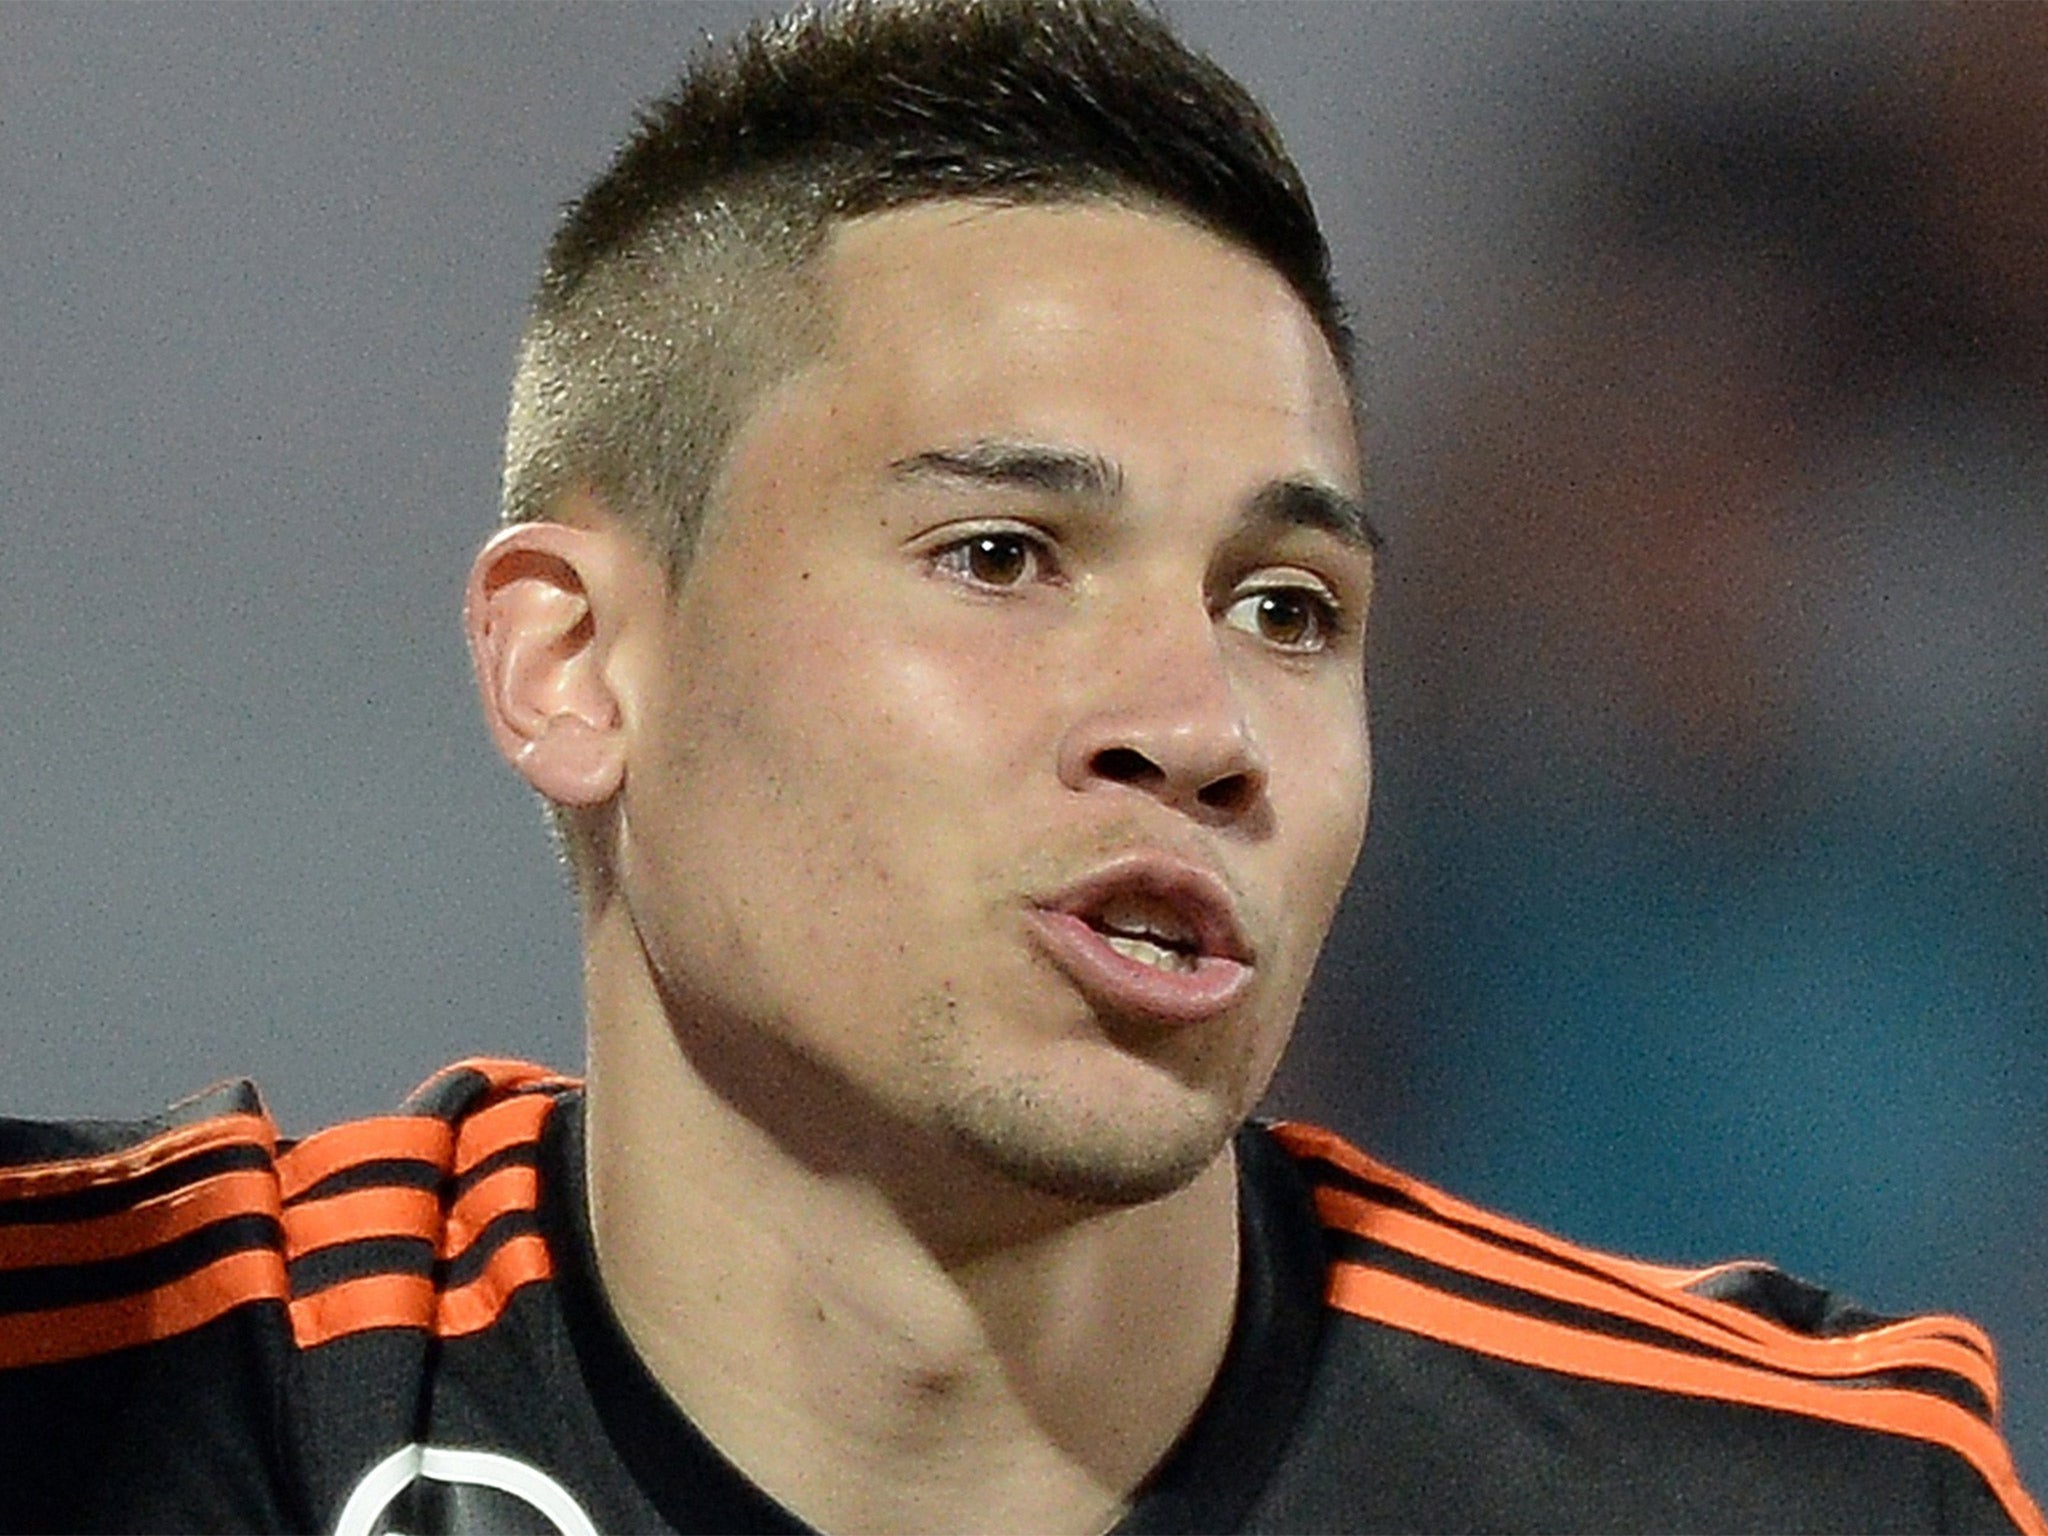 Raphael Guerreiro has broken into the full Portugal team after rising to prominence with Lorient